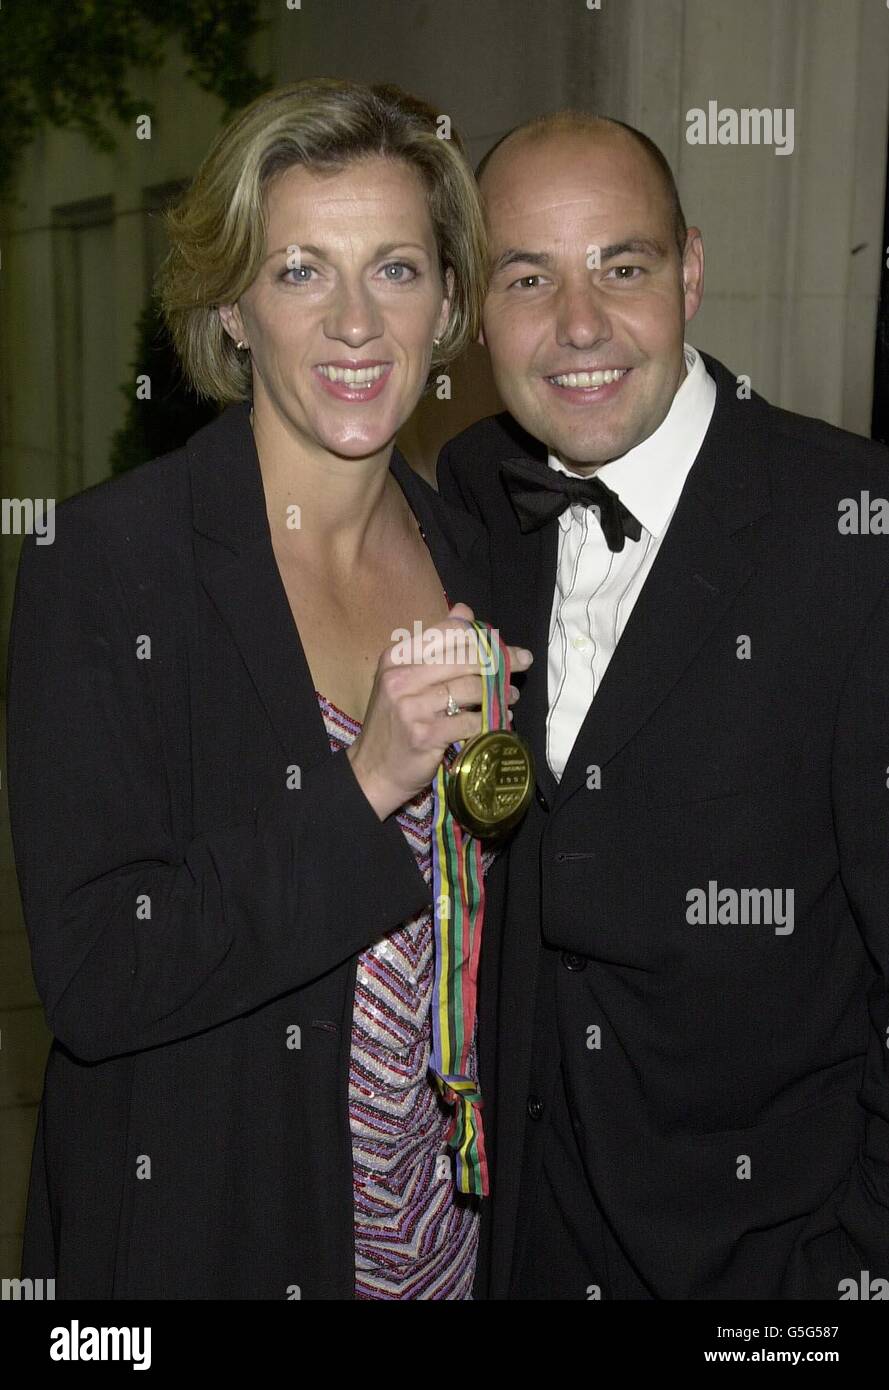 Sally Gunnell with husband John Bigg arrive at the Savoy Hotel in London, to attend the innaugural British Olympians Gold ball, in honour of medal winners. Sally won her gold medal for 400 metres hurdles in Barcelona 1992. Stock Photo